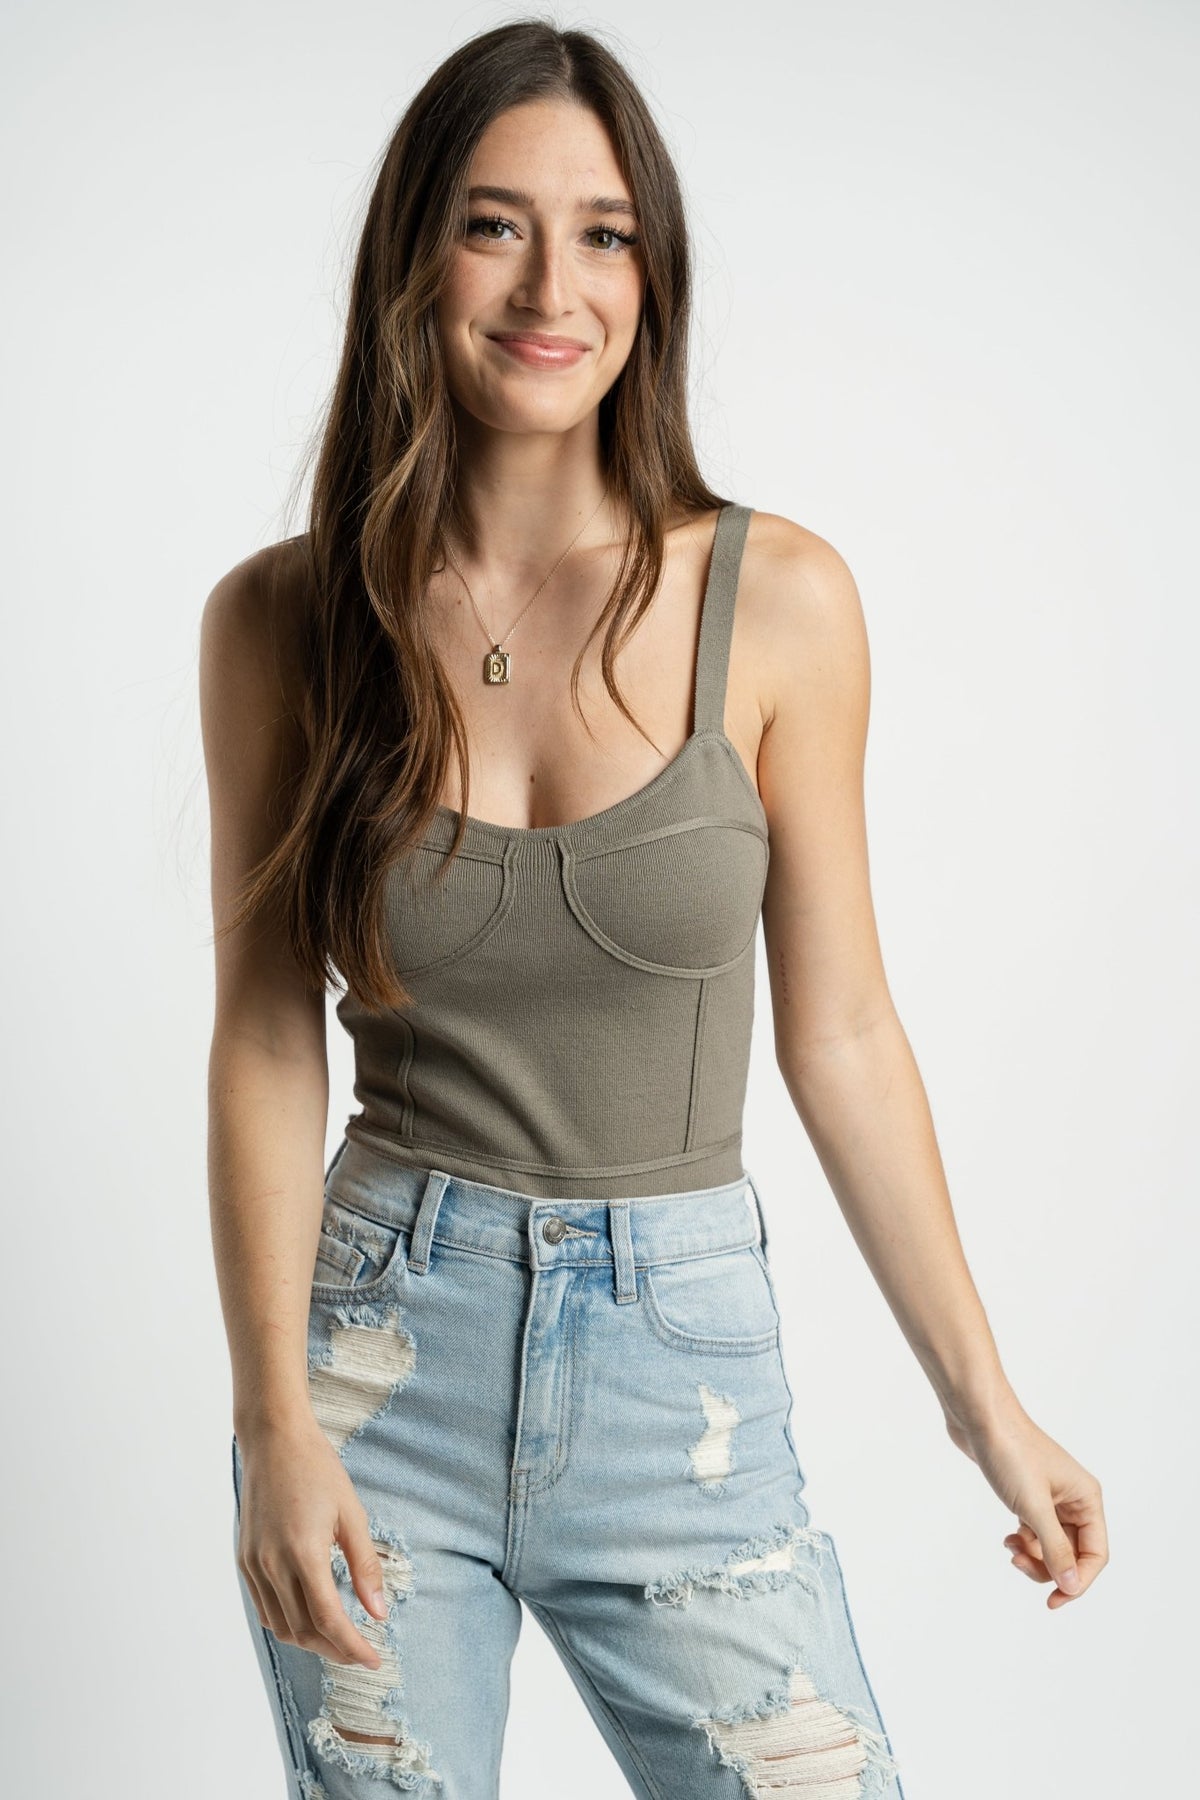 Strappy knit bodysuit olive - Cute bodysuit - Trendy Bodysuits at Lush Fashion Lounge Boutique in Oklahoma City